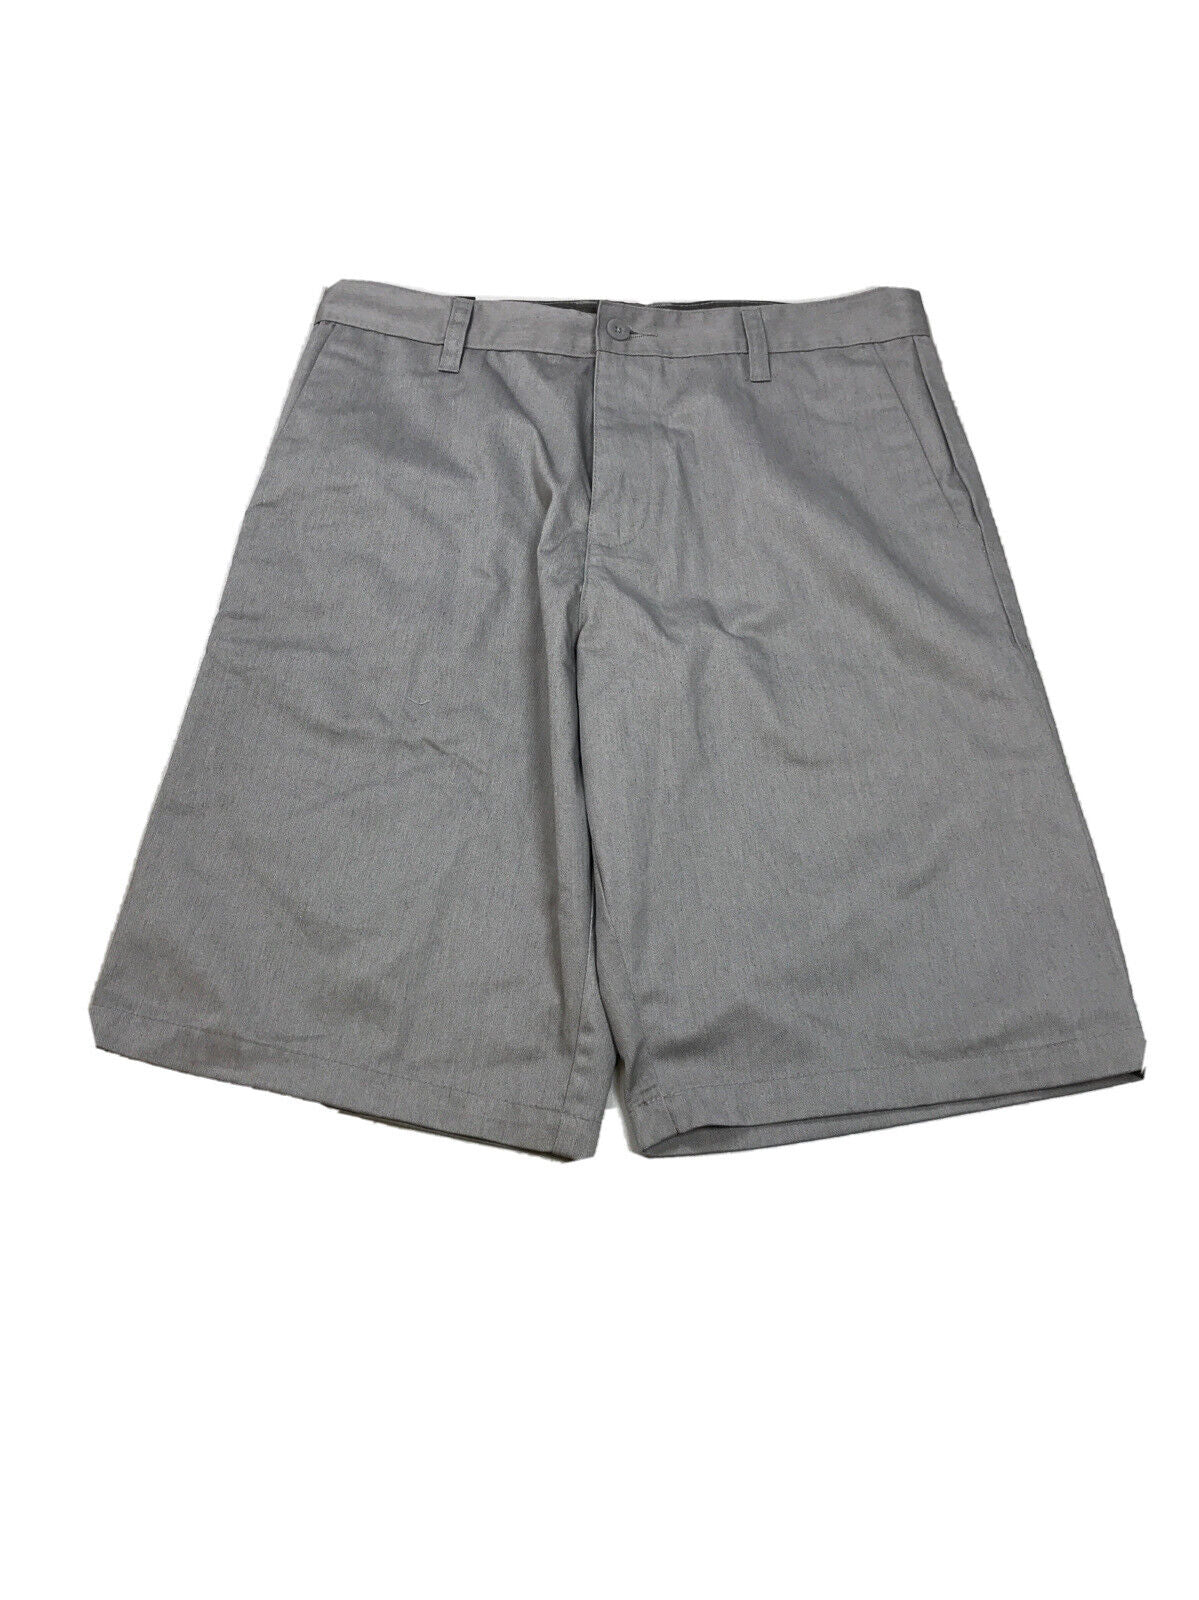 NEW Subculture Men's Gray Flat Front Chino Shorts - 32